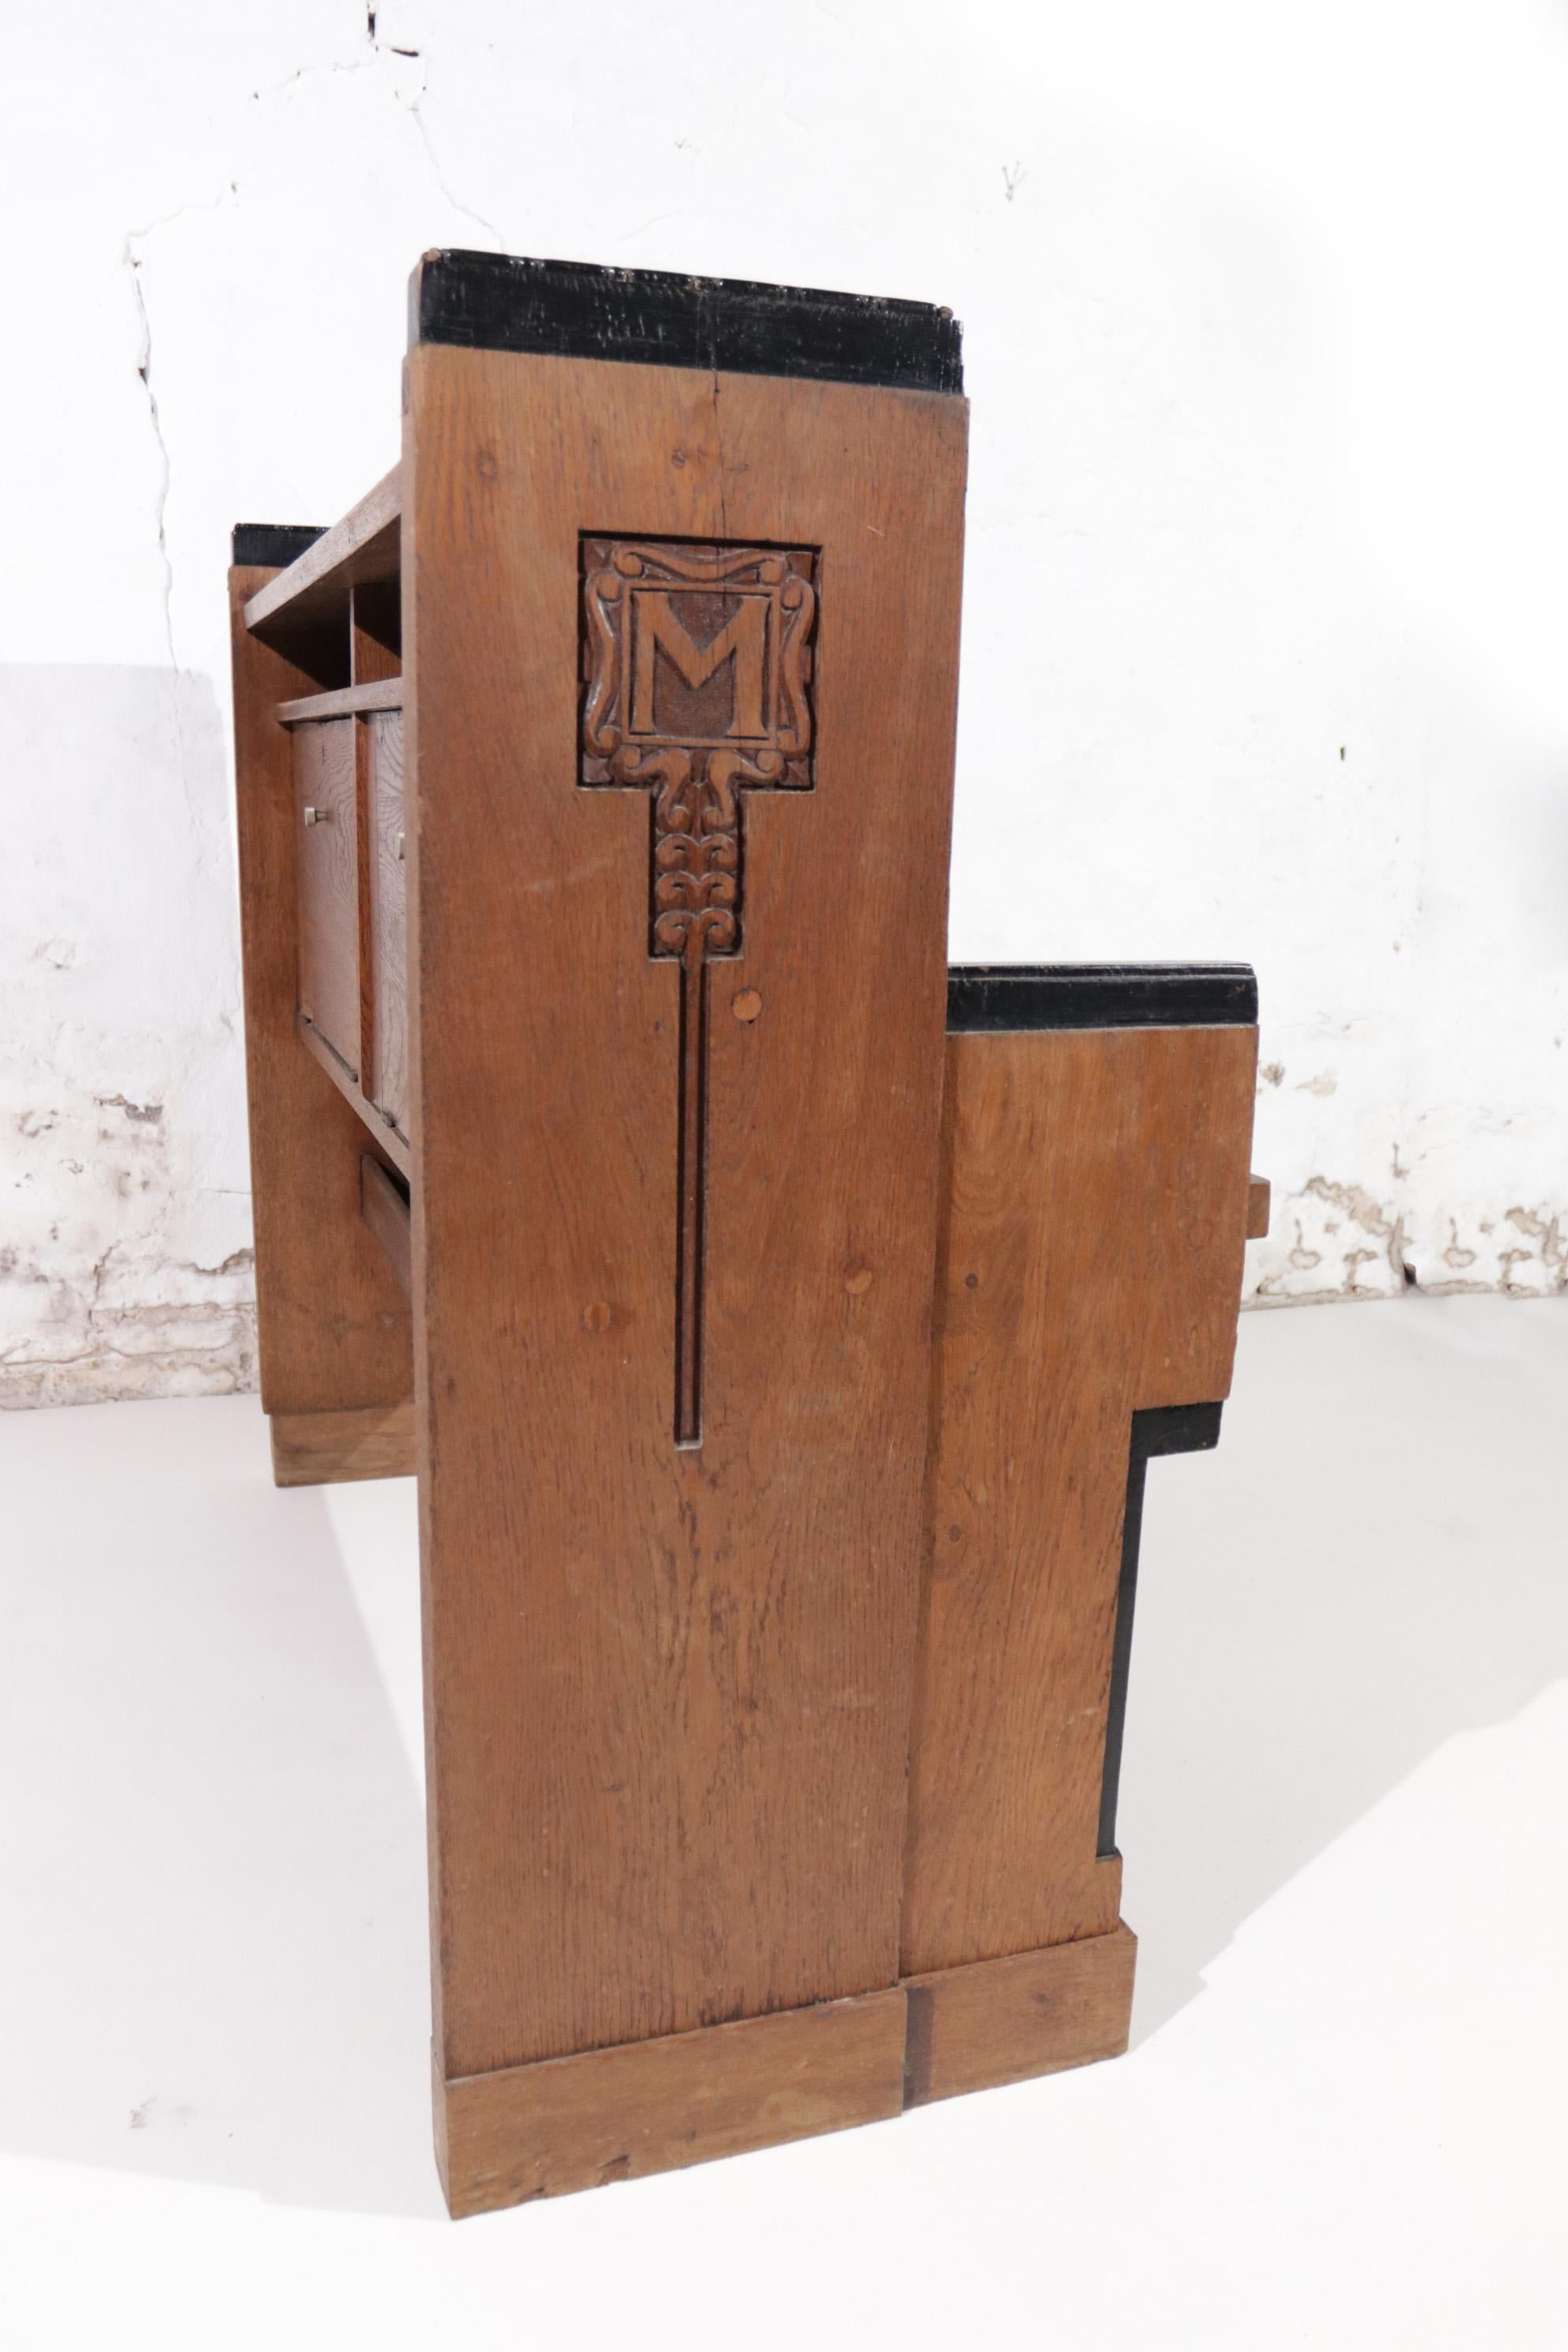 Rare Art Deco Haagse School Church Bench Letter M, ca 1930 In Good Condition For Sale In Boven Leeuwen, NL